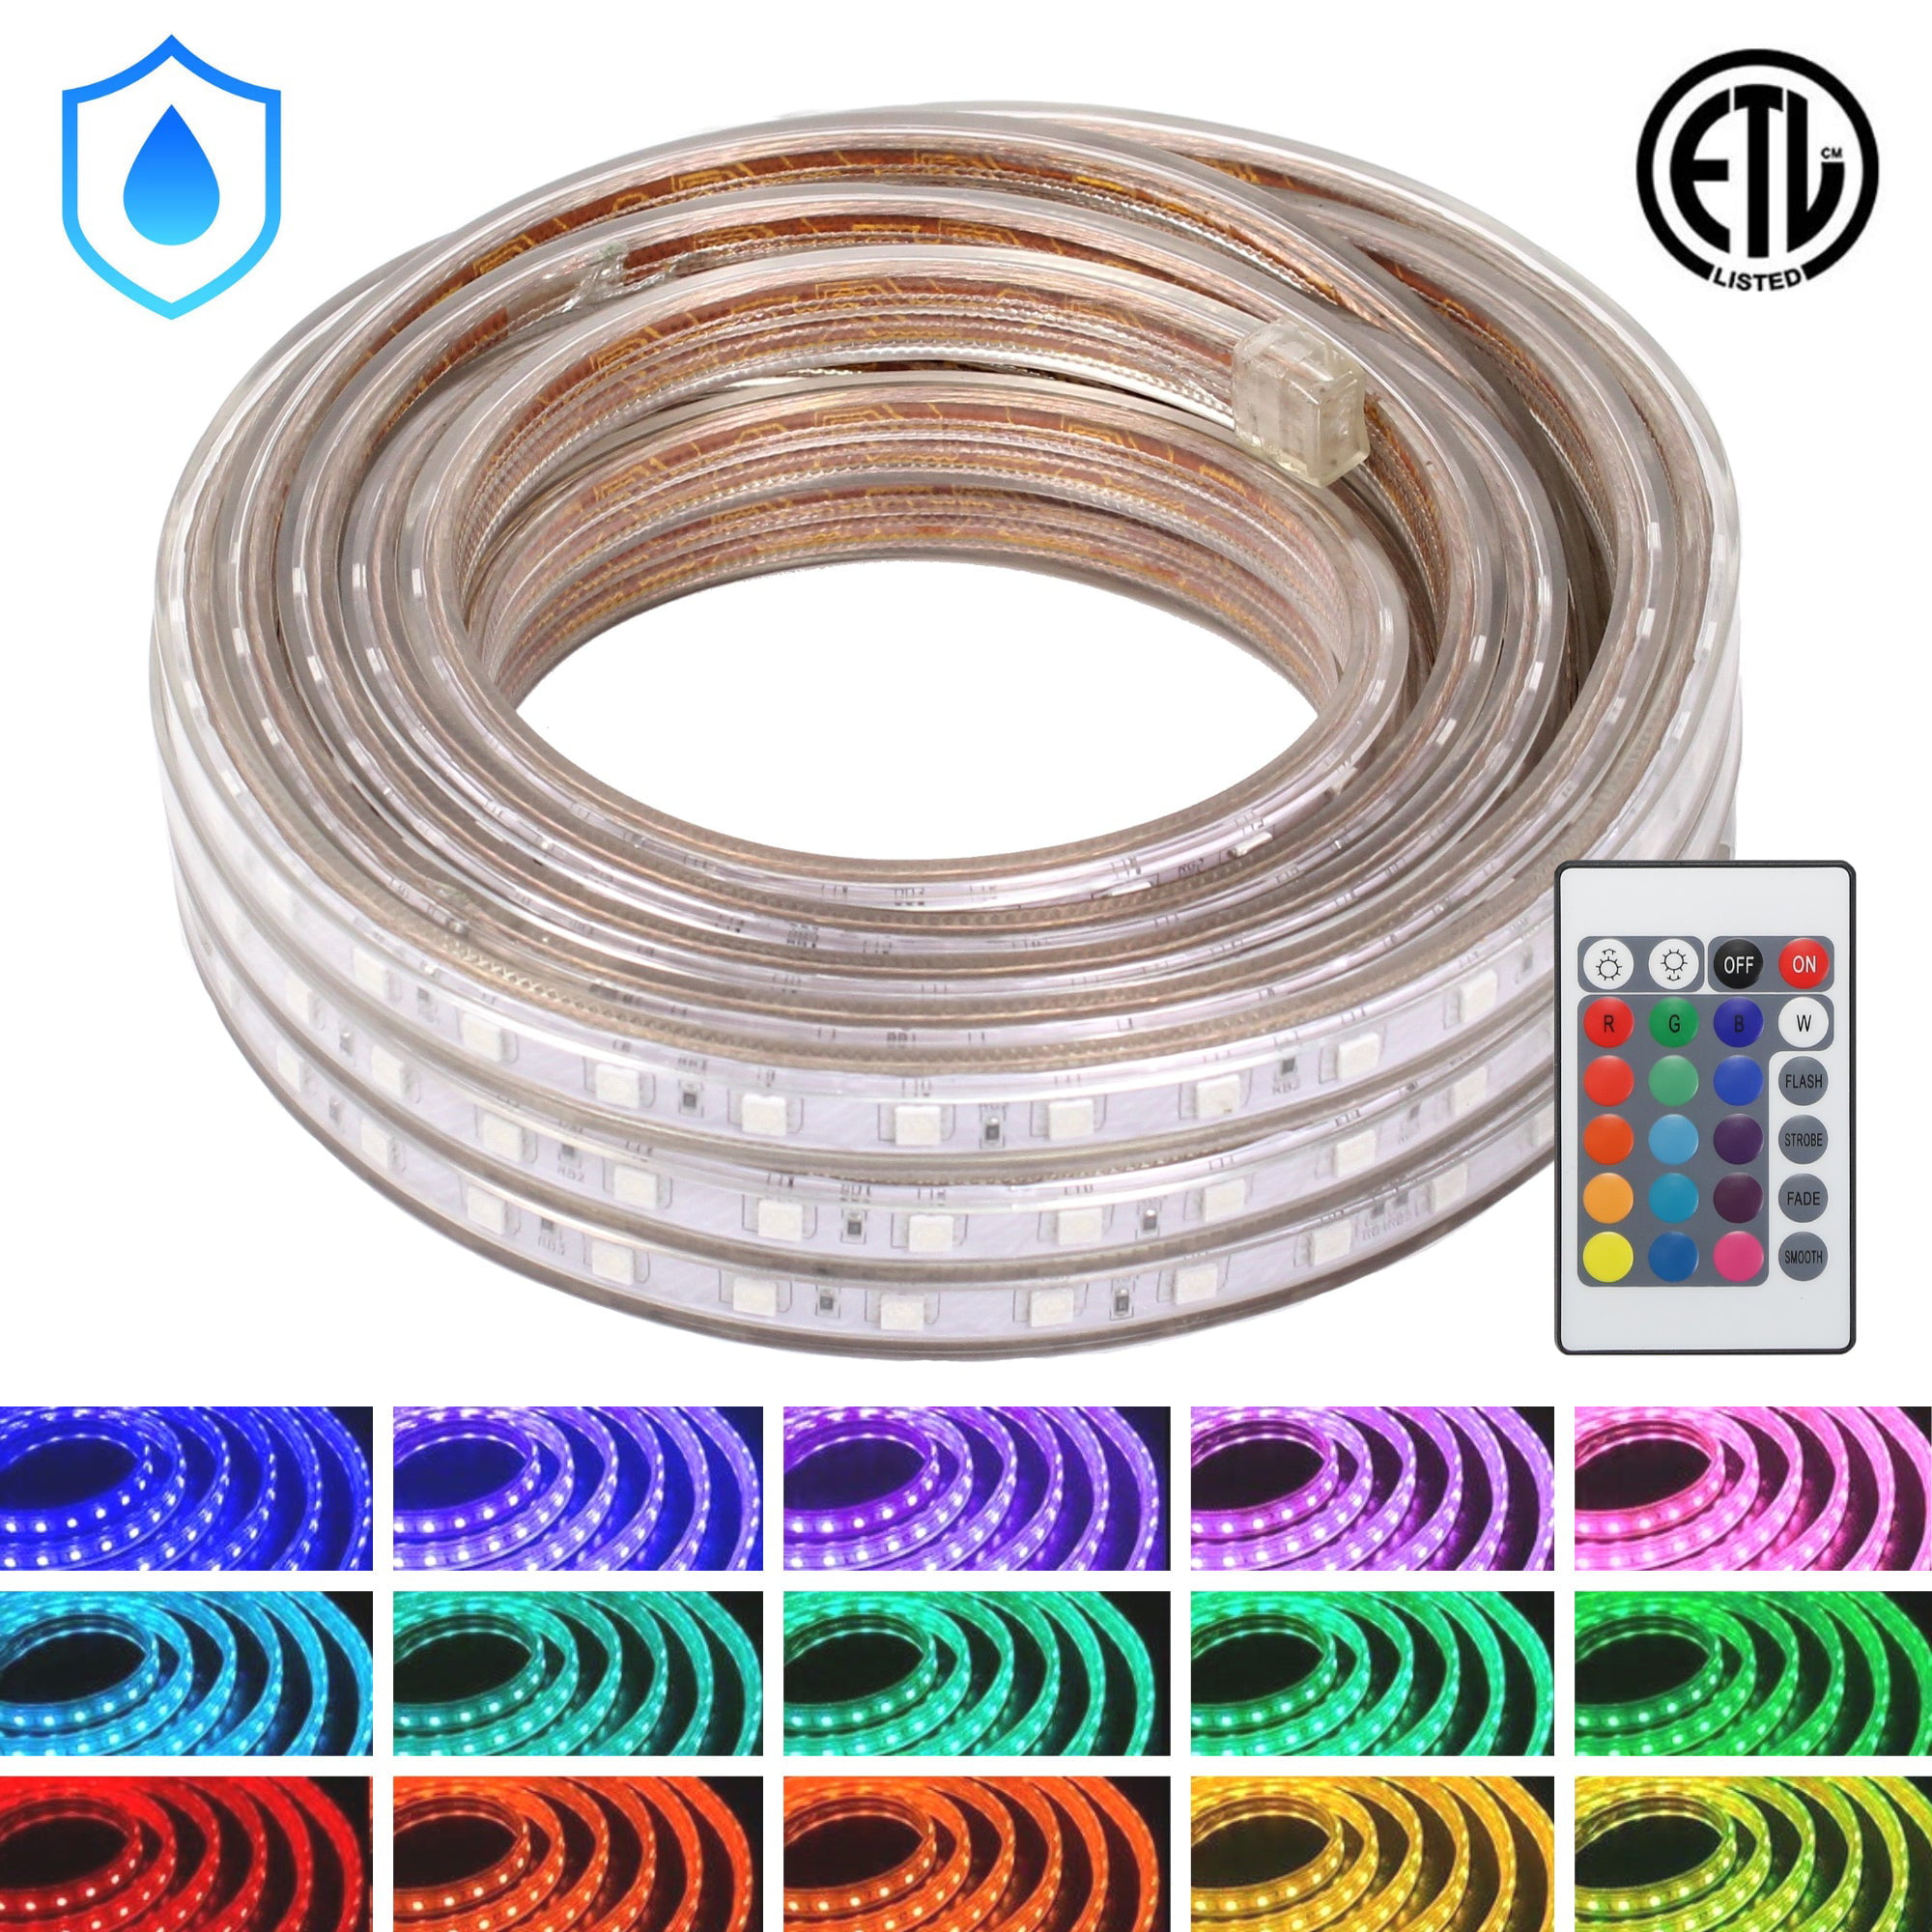 WYZworks SMD 5050 LED Flexible Dimming Indoor/Outdoor Light Strip 16 COLORS 